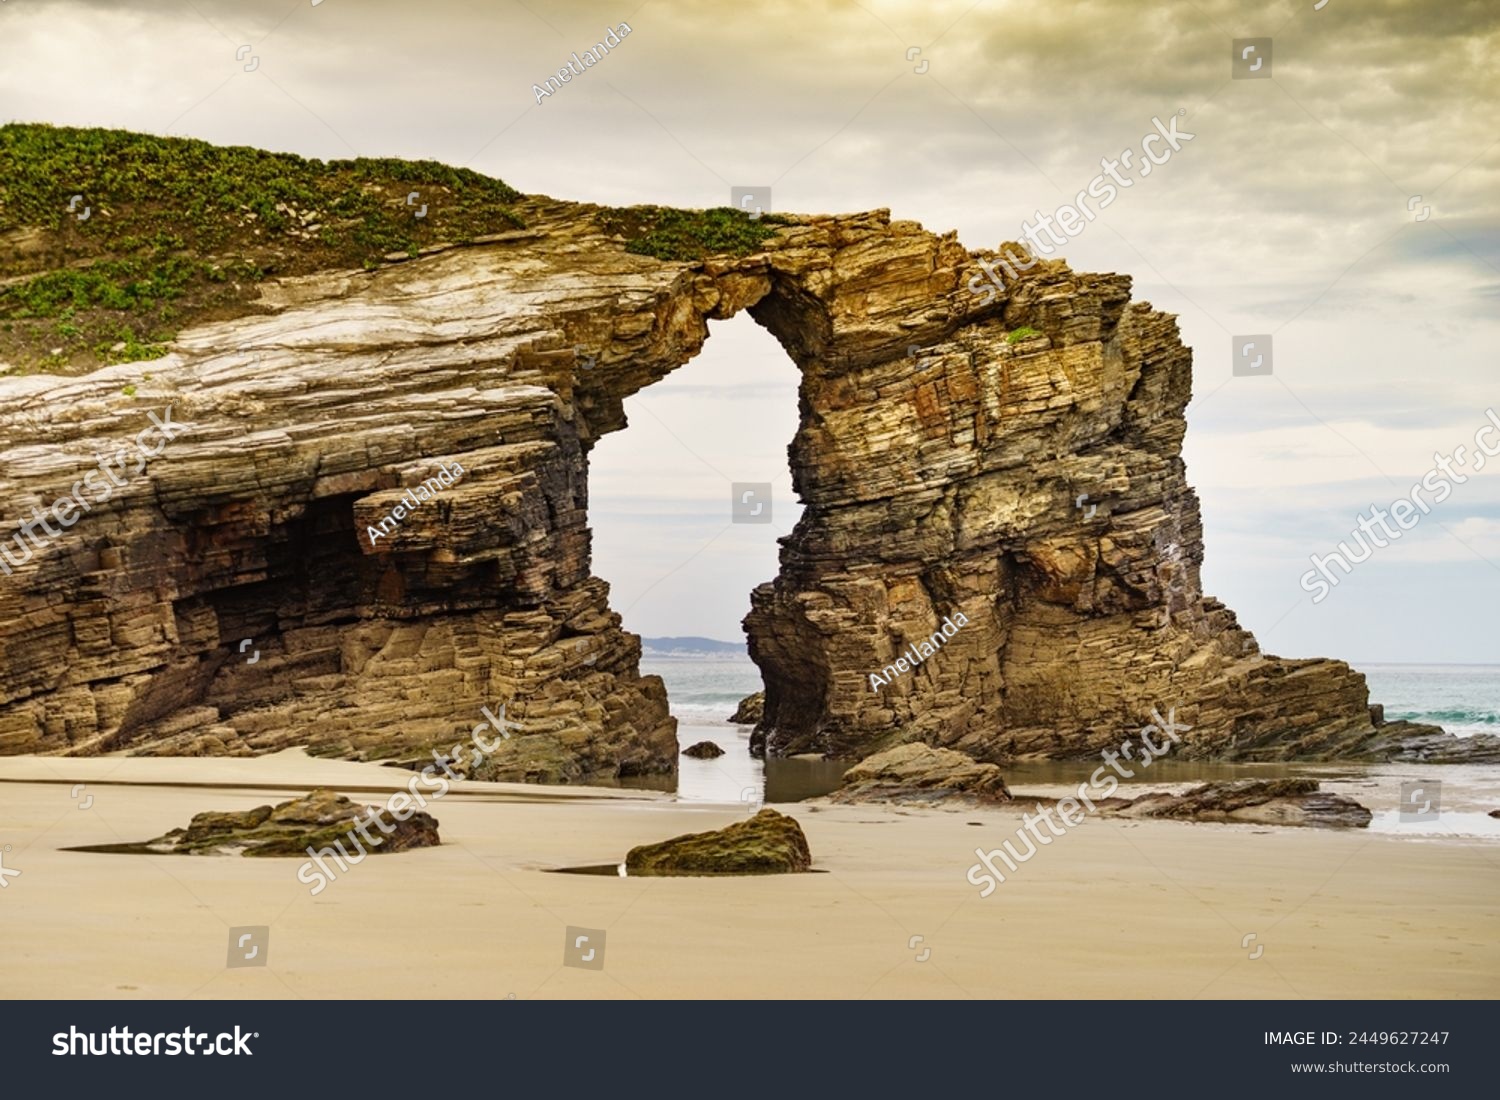 Beach of the Cathedrals, Playa las Catedrales in Ribadeo, province of Lugo, Galicia. Cliff formations on Cantabric coast in northern Spain. Tourist attraction. #2449627247